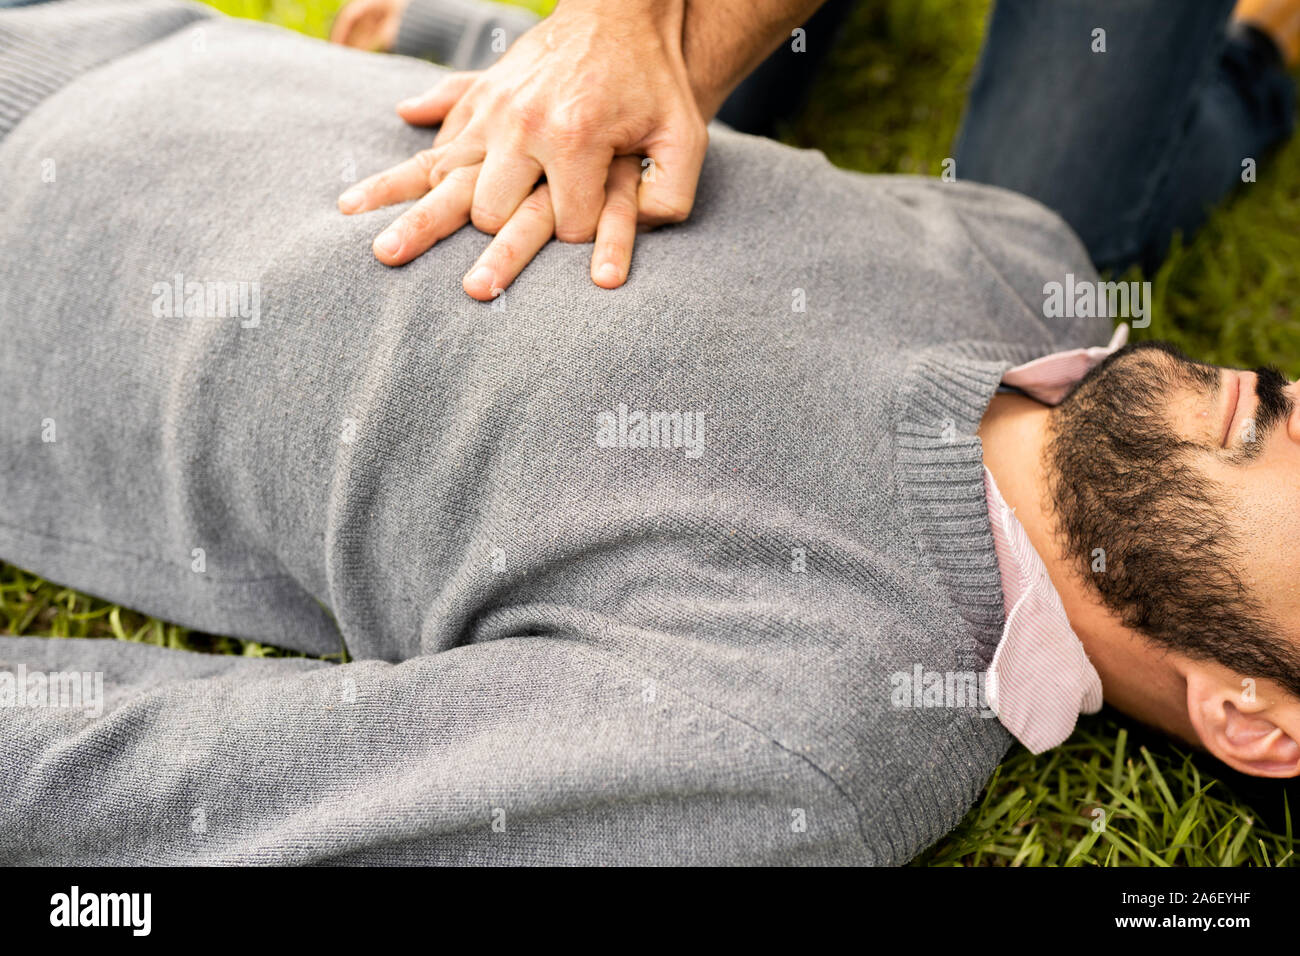 First Aid Emergency CPR rcp on Heart Attack Man , Resuscitation cardiopulmonary Stock Photo